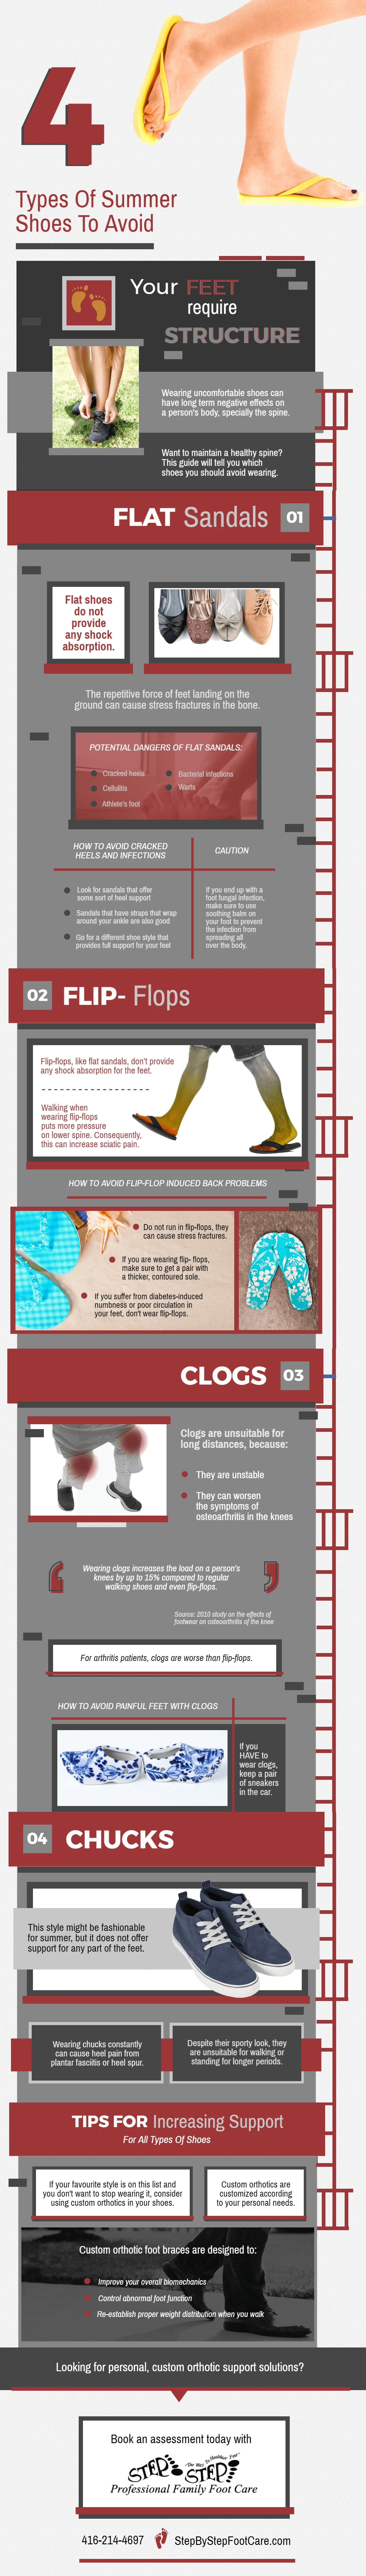 Step By Step Foot Care Clinic On 4 Types Of Summer Shoes To Avoid